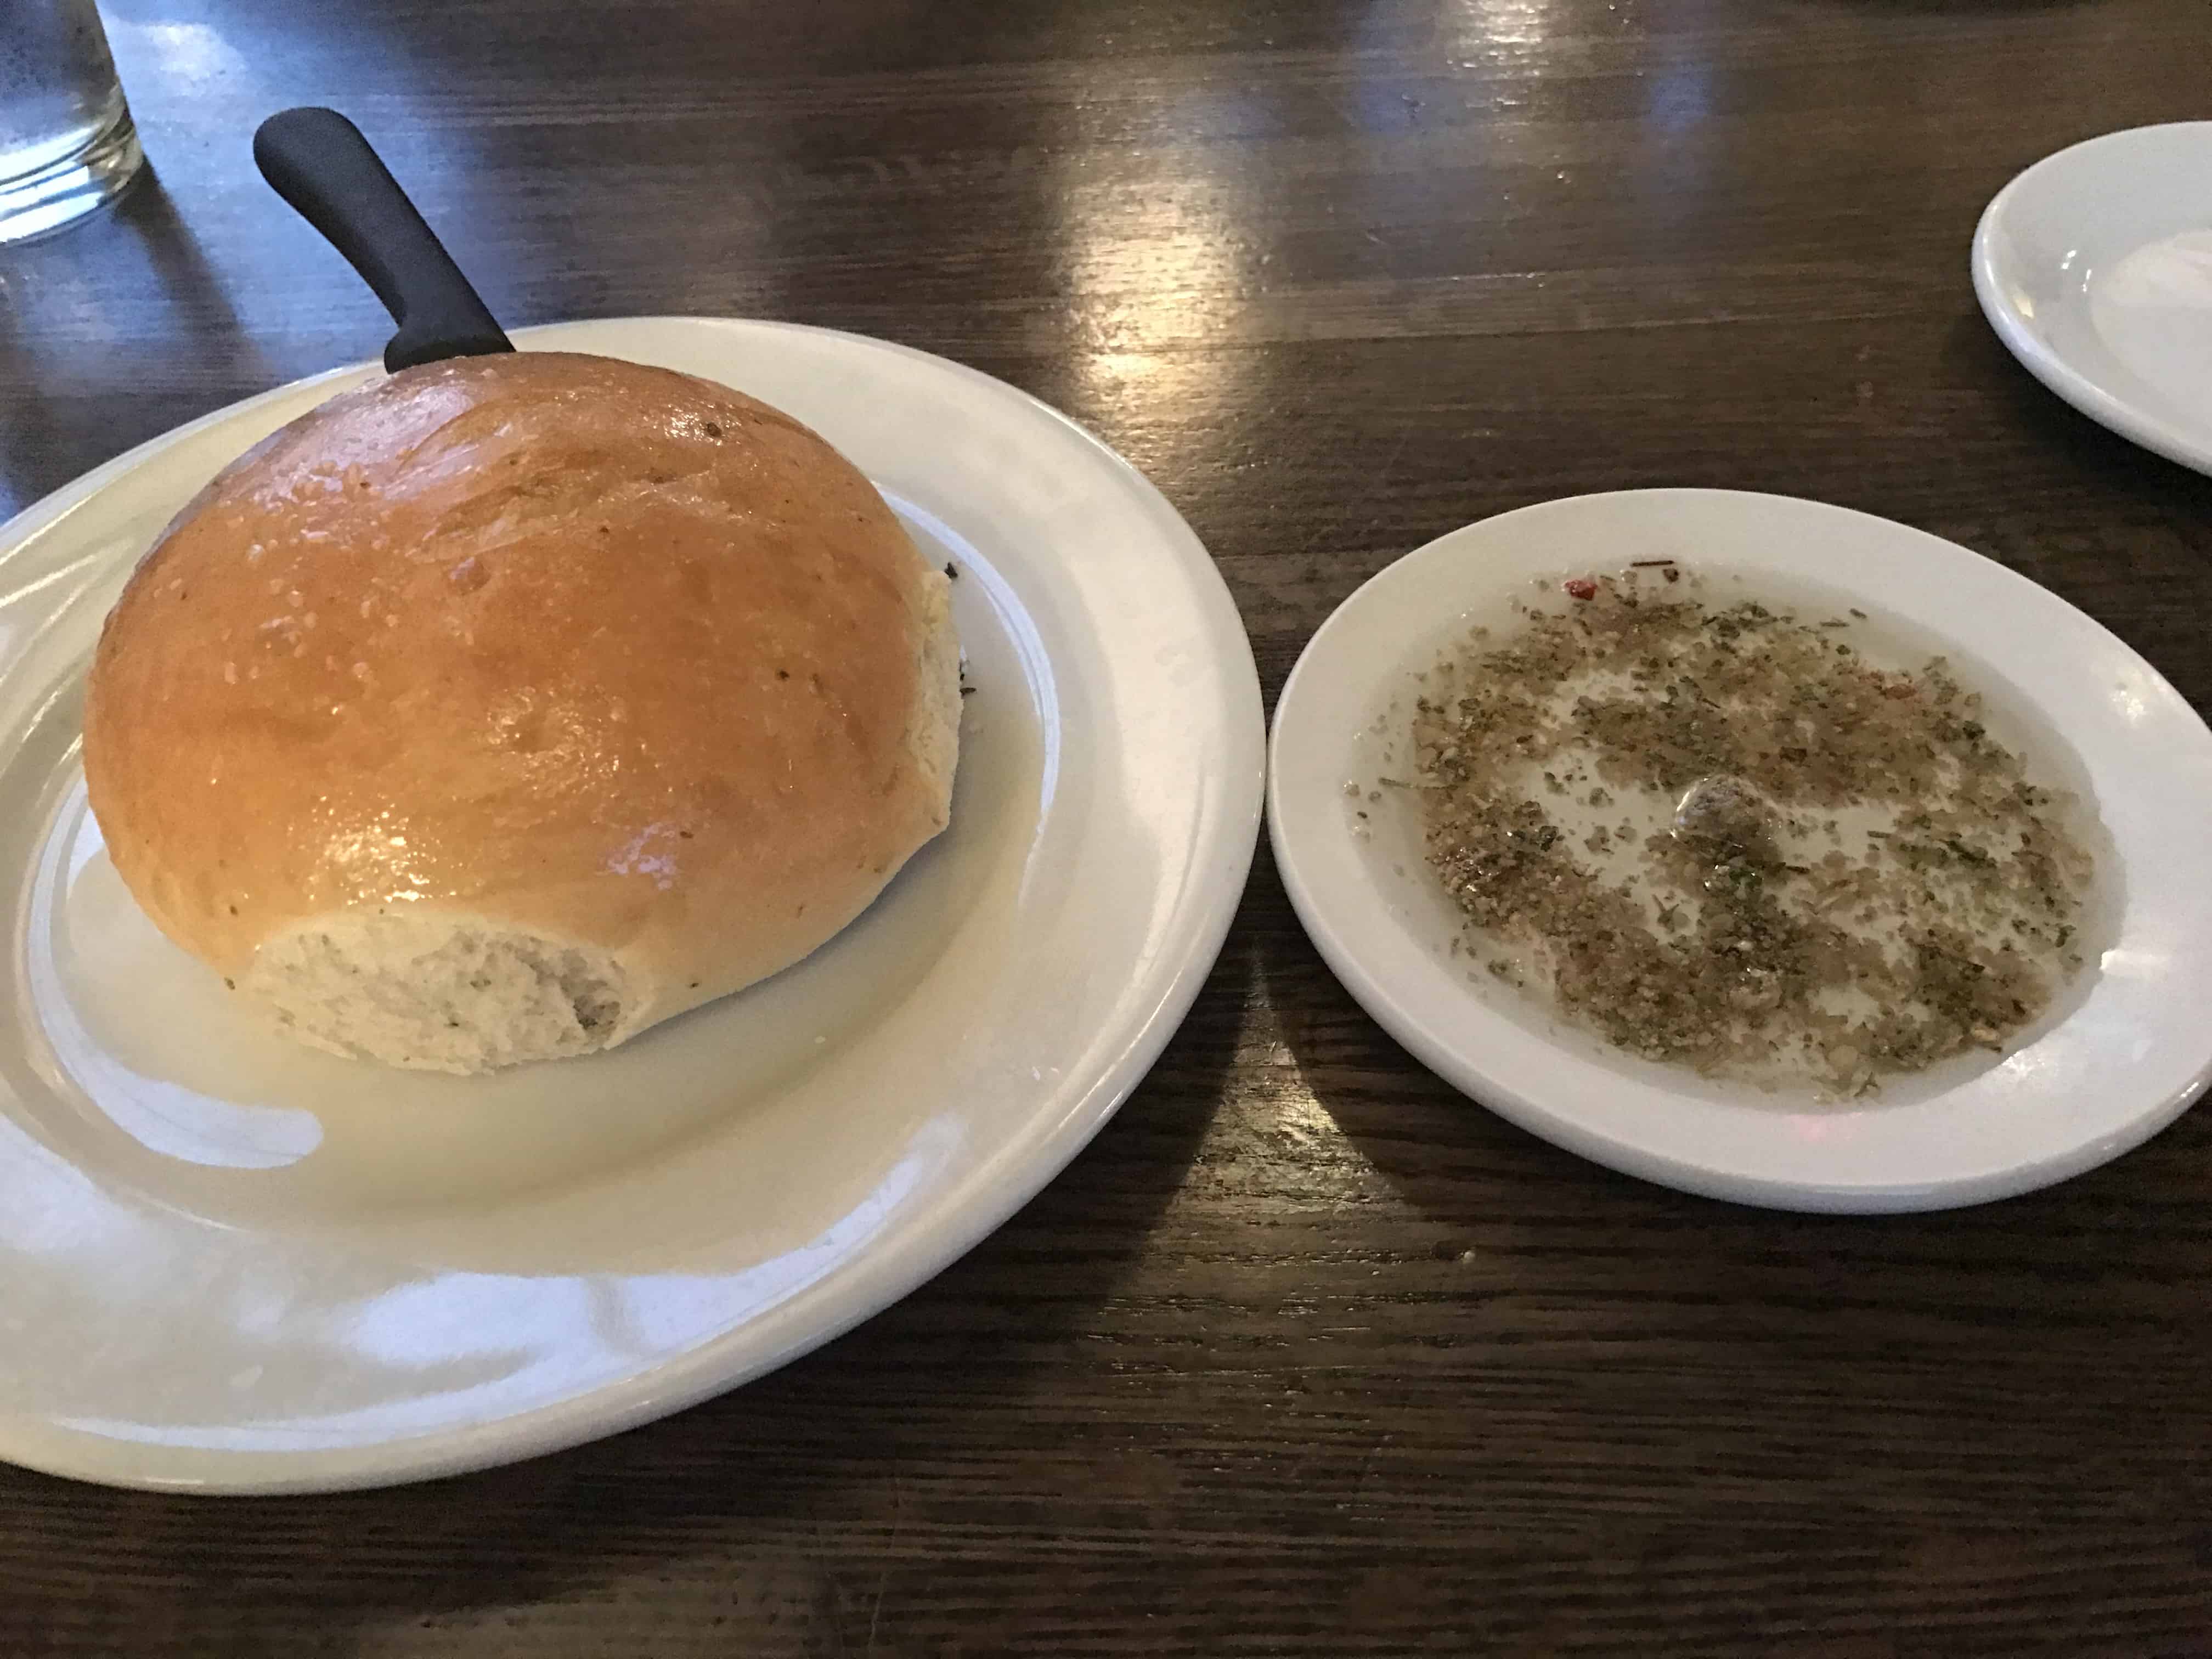 Terranova's rosemary-infused bread with dipping herbs